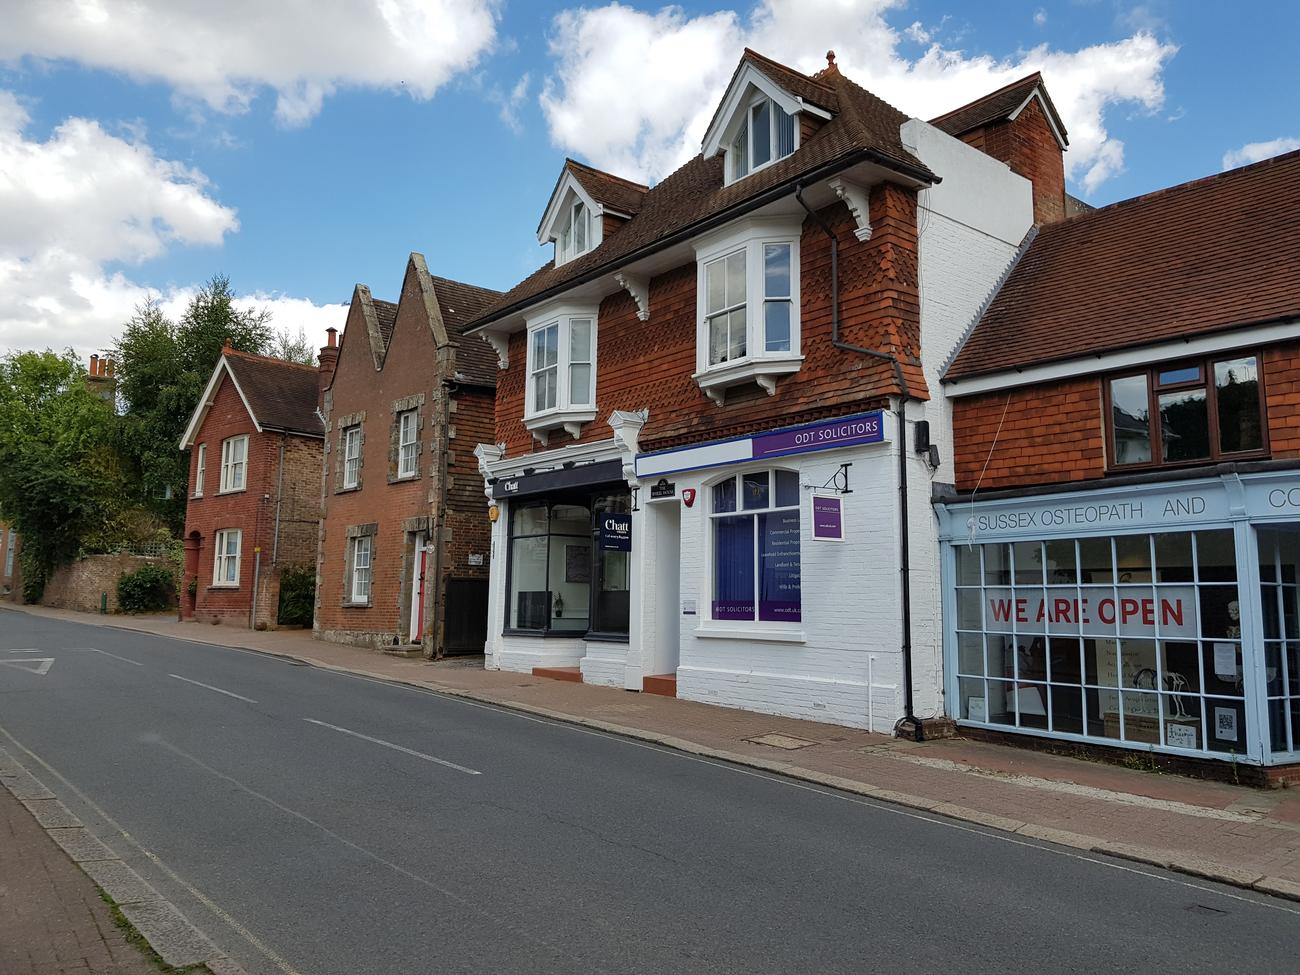 Gallery | Chartered Surveyor in Hurstpeirpoint and West Sussex gallery image 4